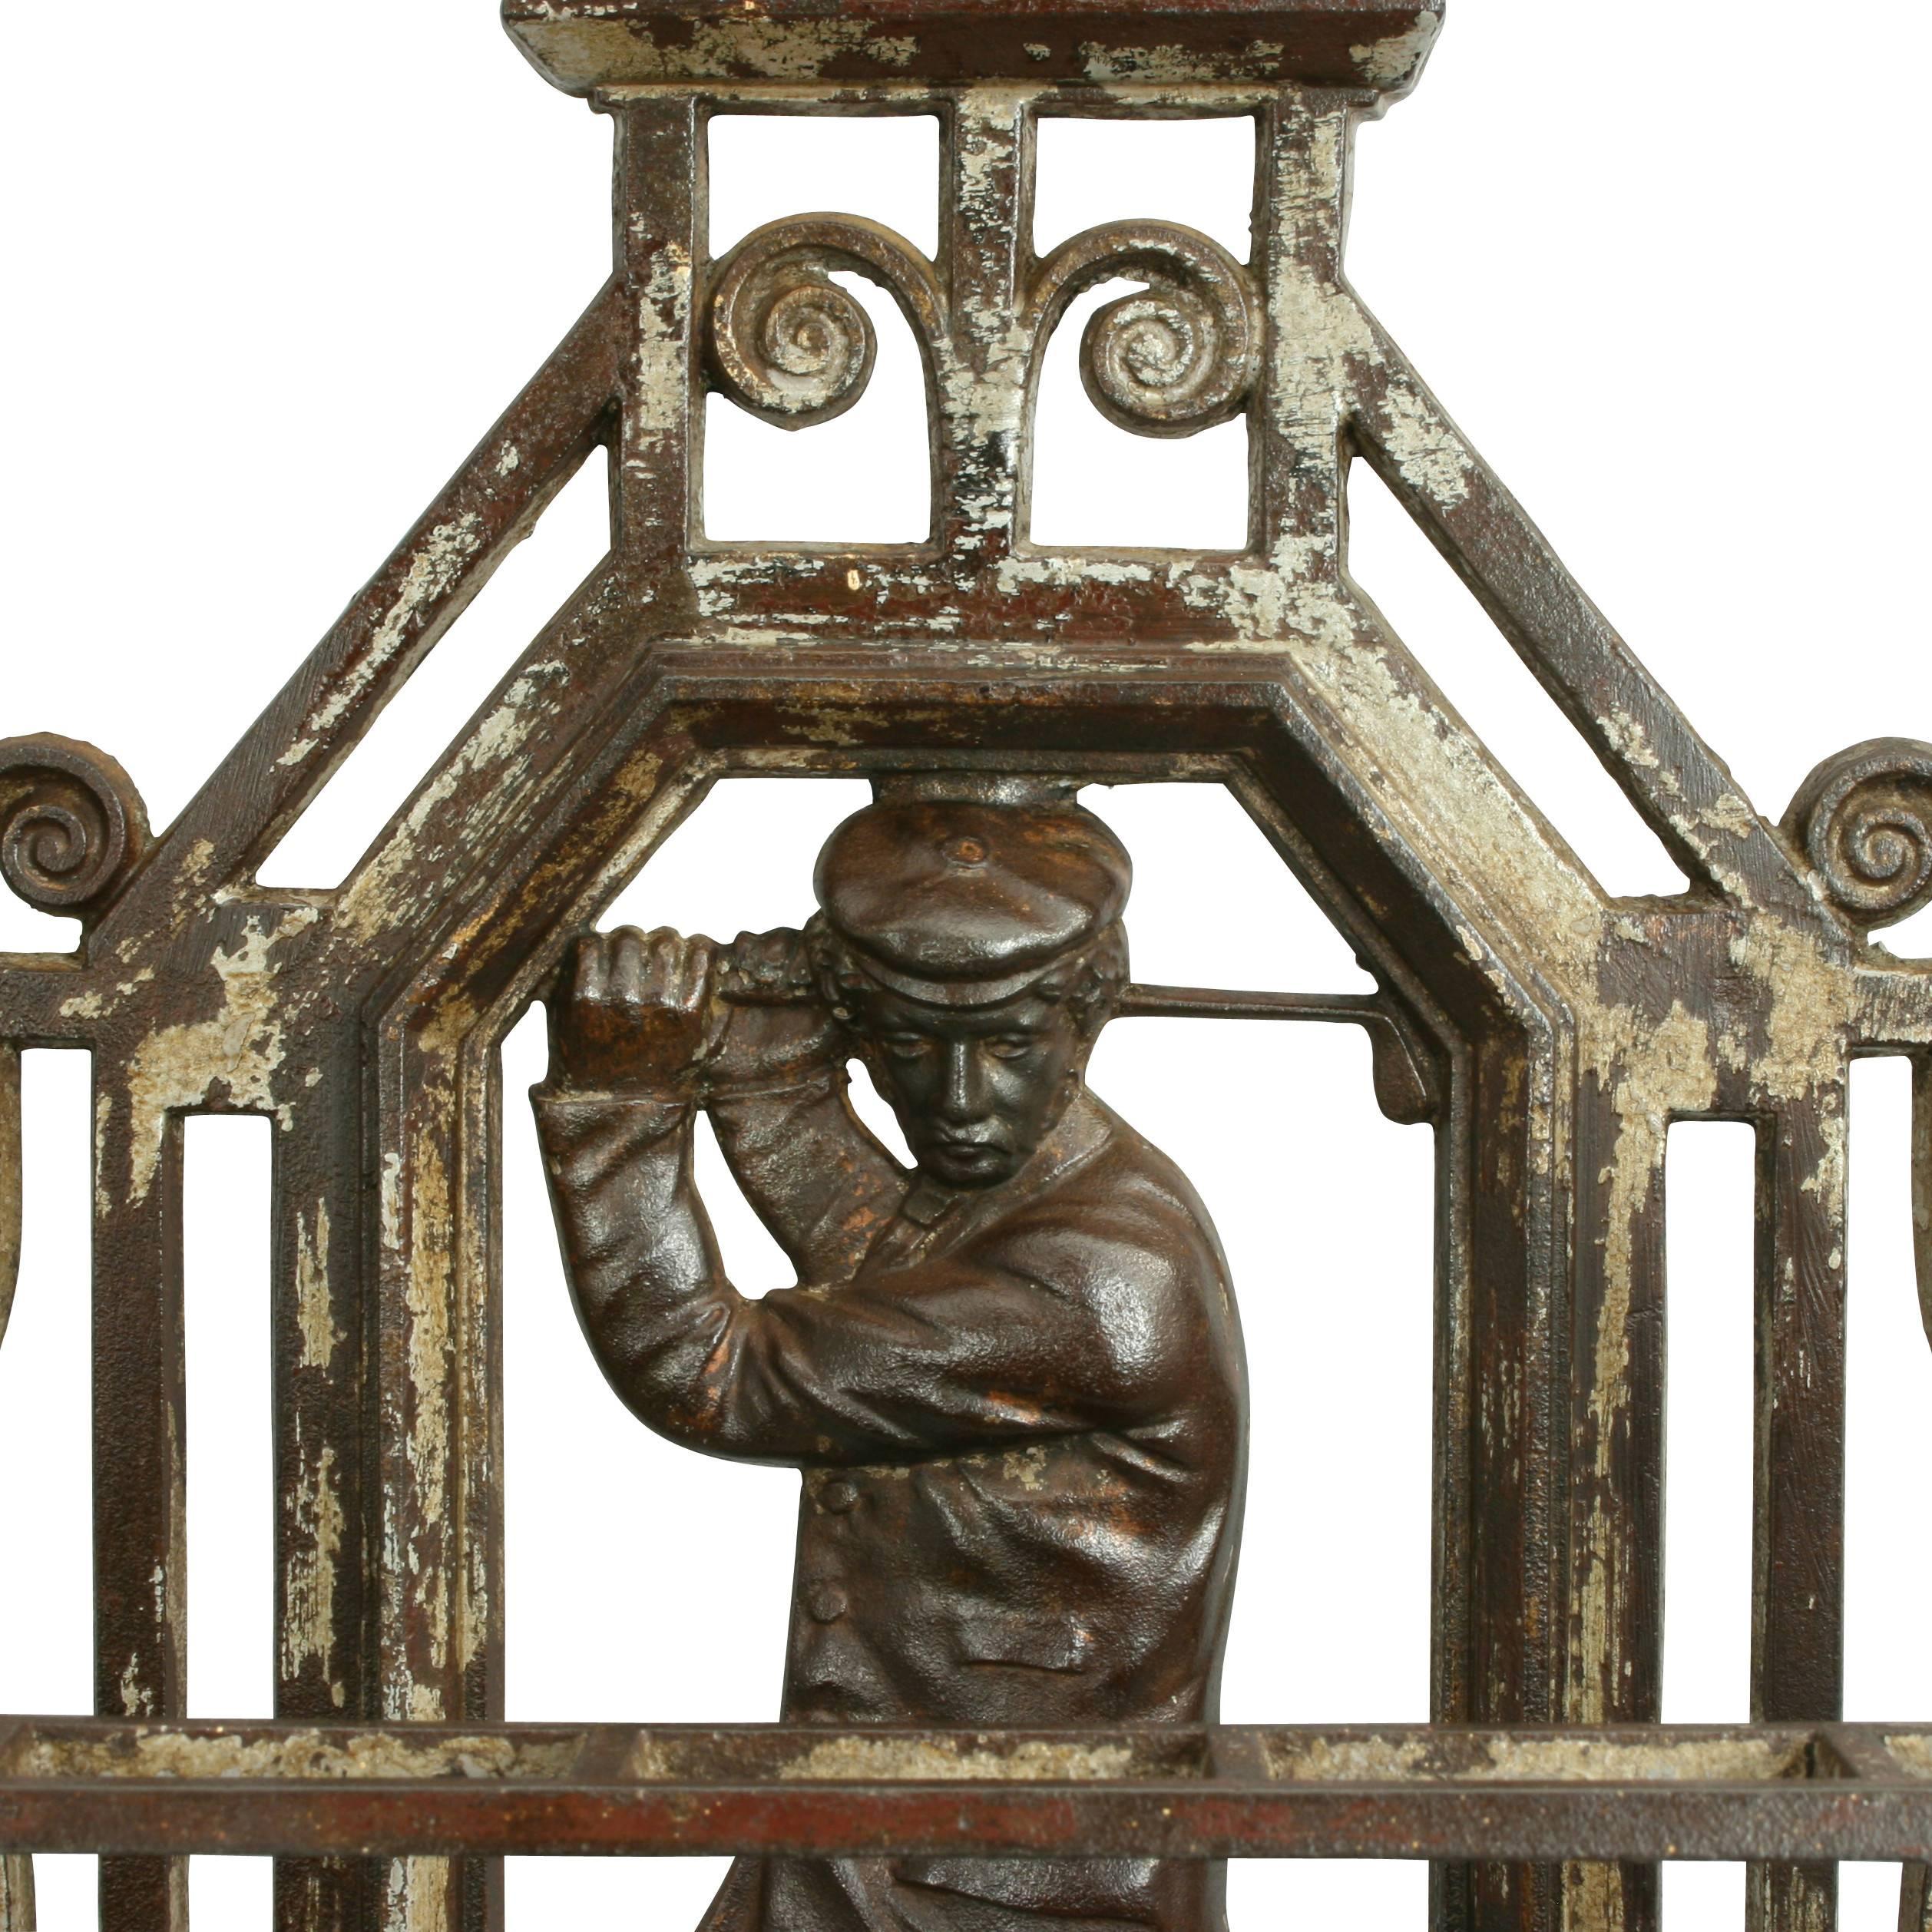 A most wonderful Victorian, cast iron golf umbrella stand.
An original unusual antique cast iron umbrella or stick stand. The back plate depicts a golfer in full back swing, inscribed above 'Golfer'. The stand comes with the two original removable